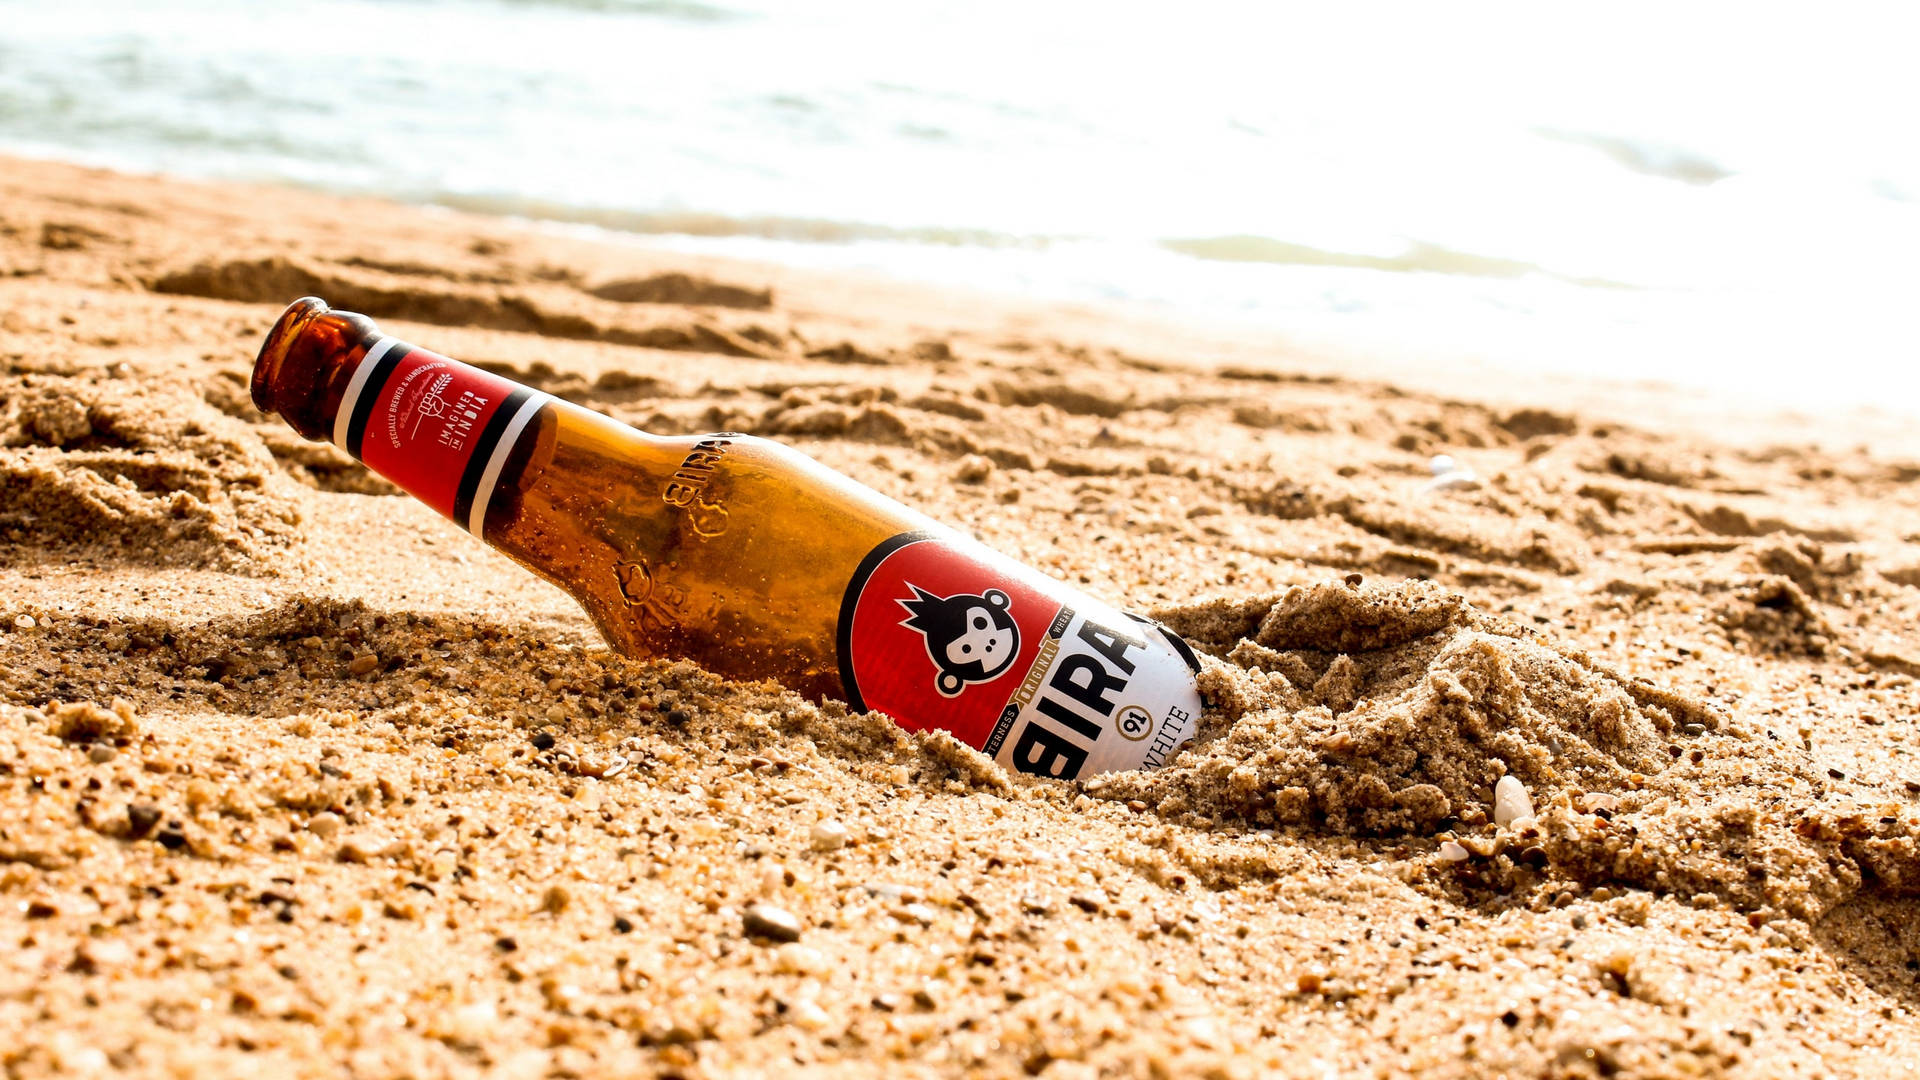 Beer Bottle Buried On The Sand Wallpaper